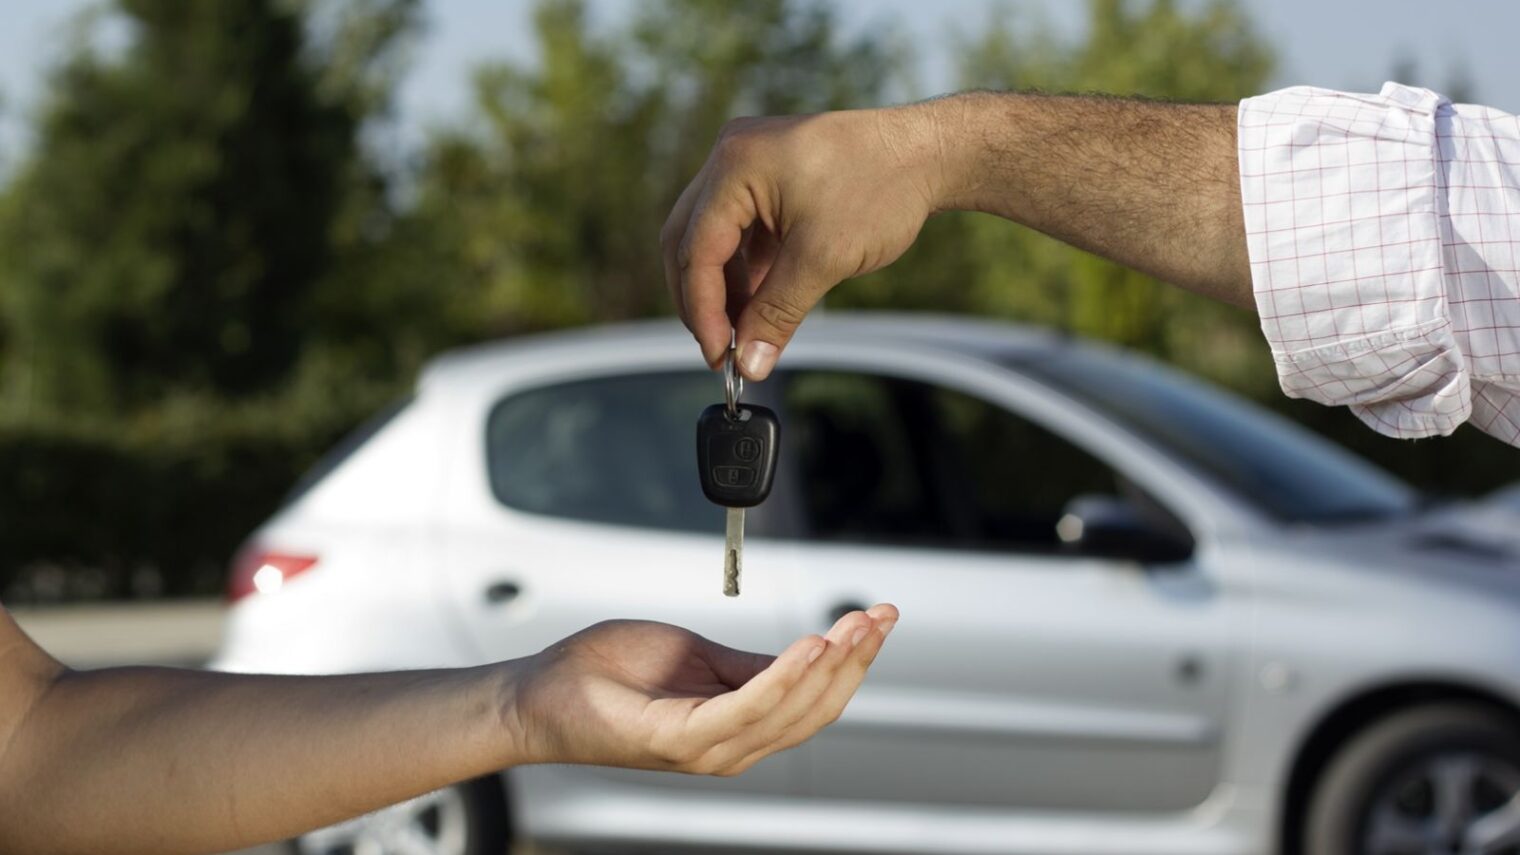 Buy a car online and get it delivered to your door. Image via Shutterstock.com